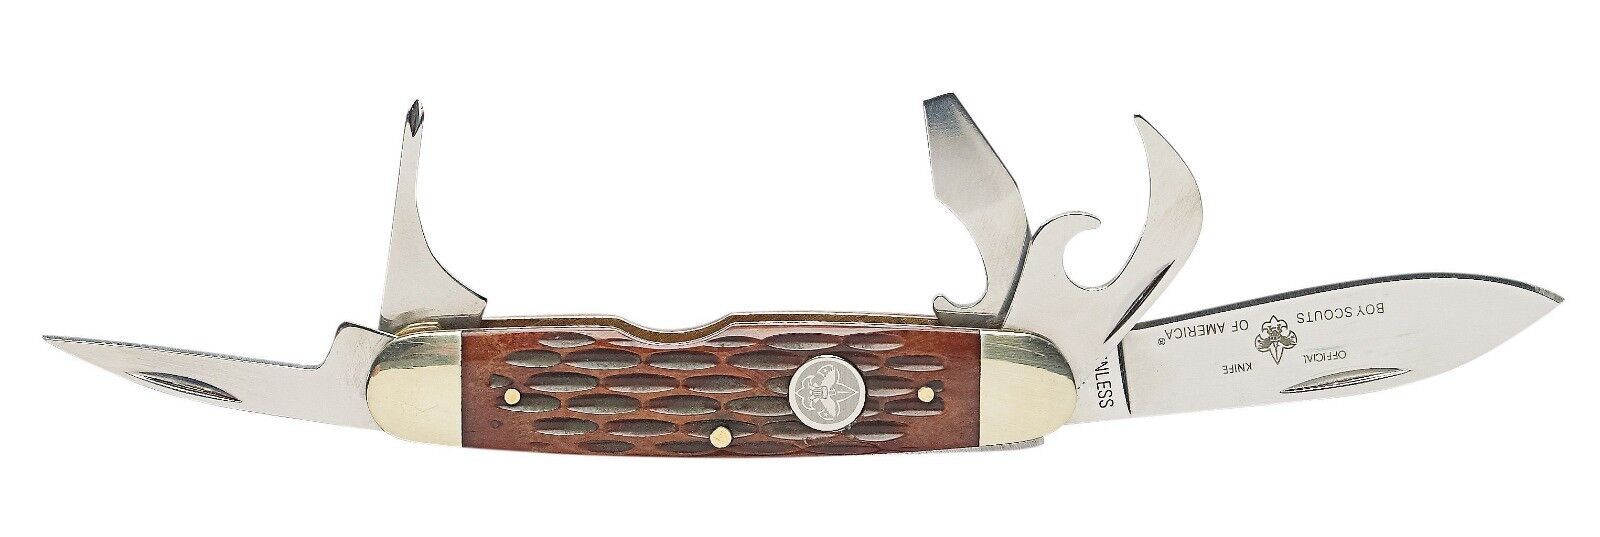 BSA BOY SCOUT OFFICIAL LICENSED STAINLESS STEEL DELUXE POCKET KNIFE 5 MULTI-TOOL